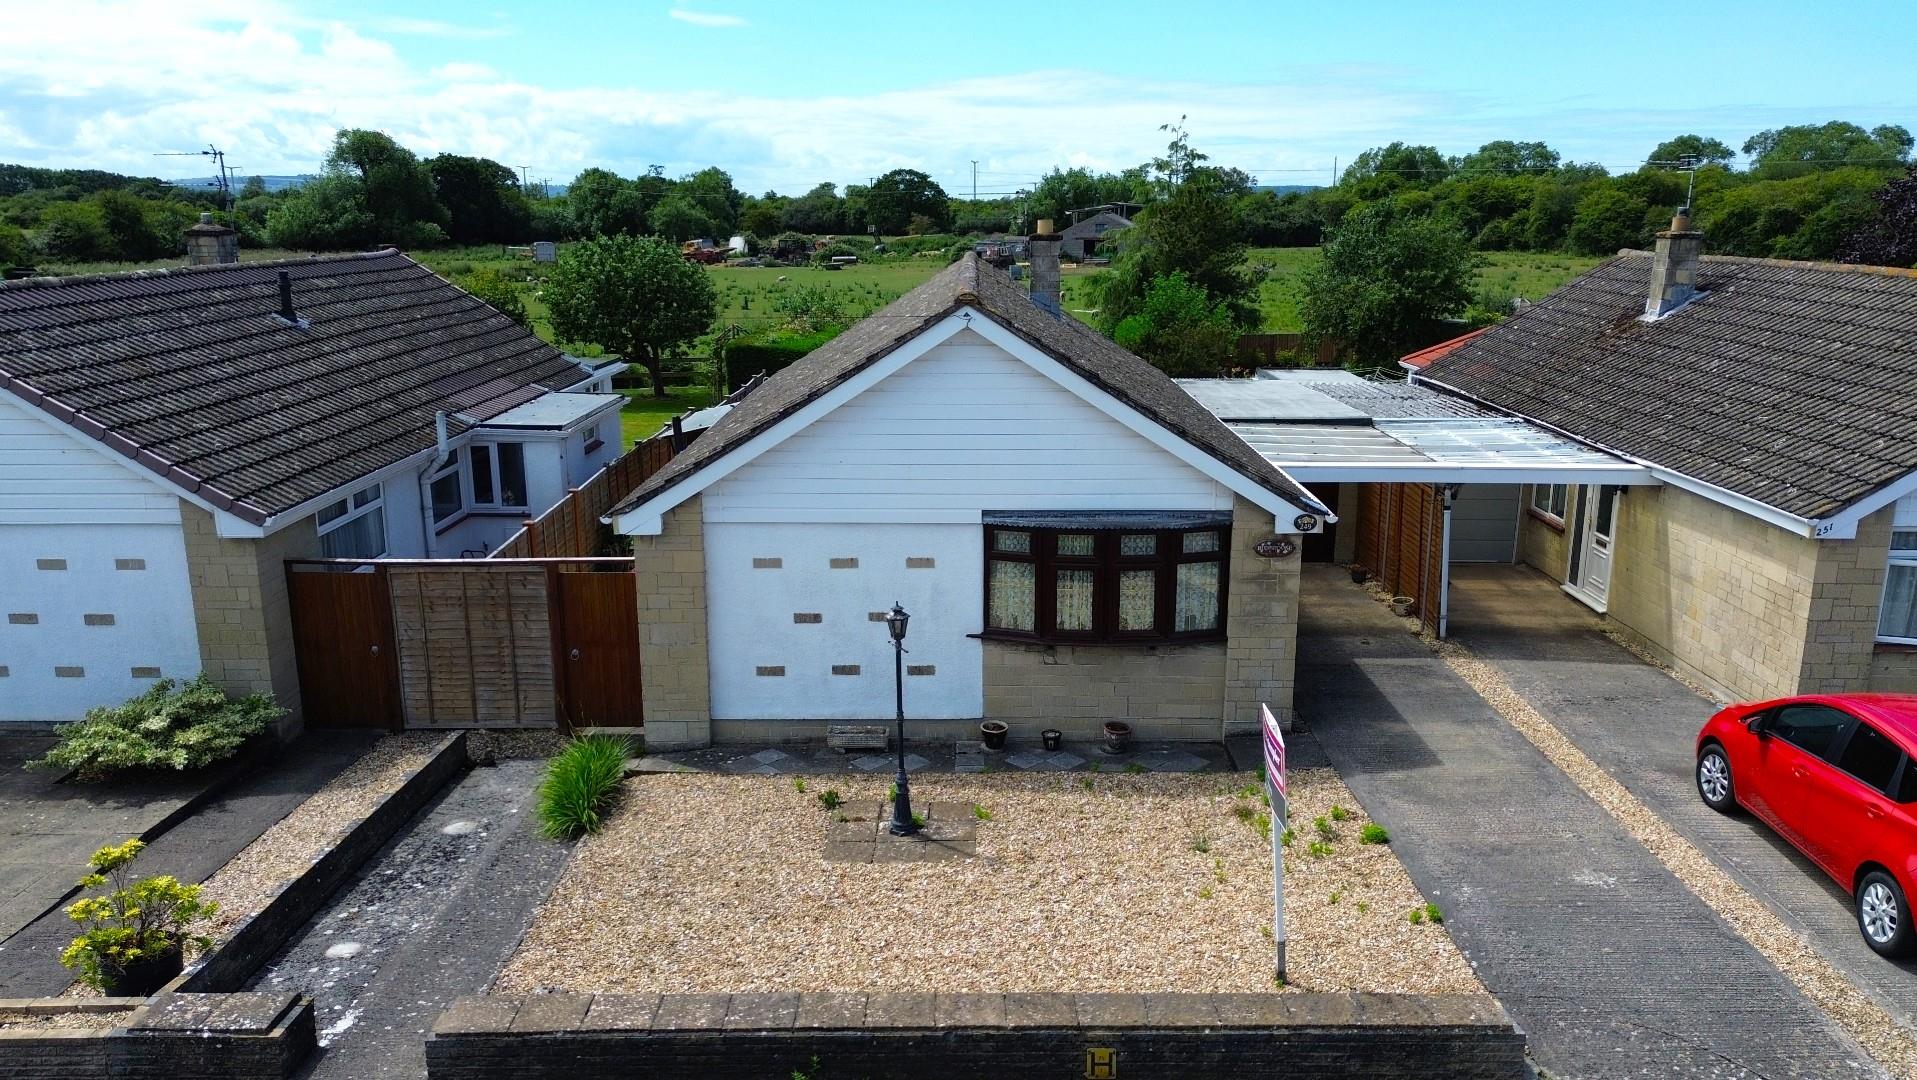 Detached bungalow with views over Yatton's countryside